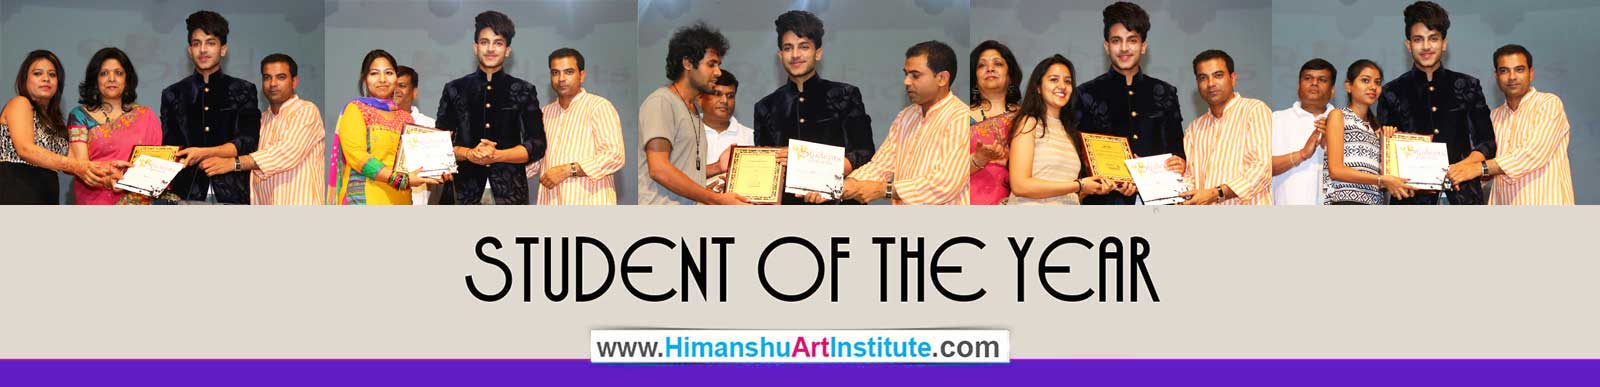 Student of the Year, Painting, Sketching, Art & Crafts in Delhi, Gurgaon, India